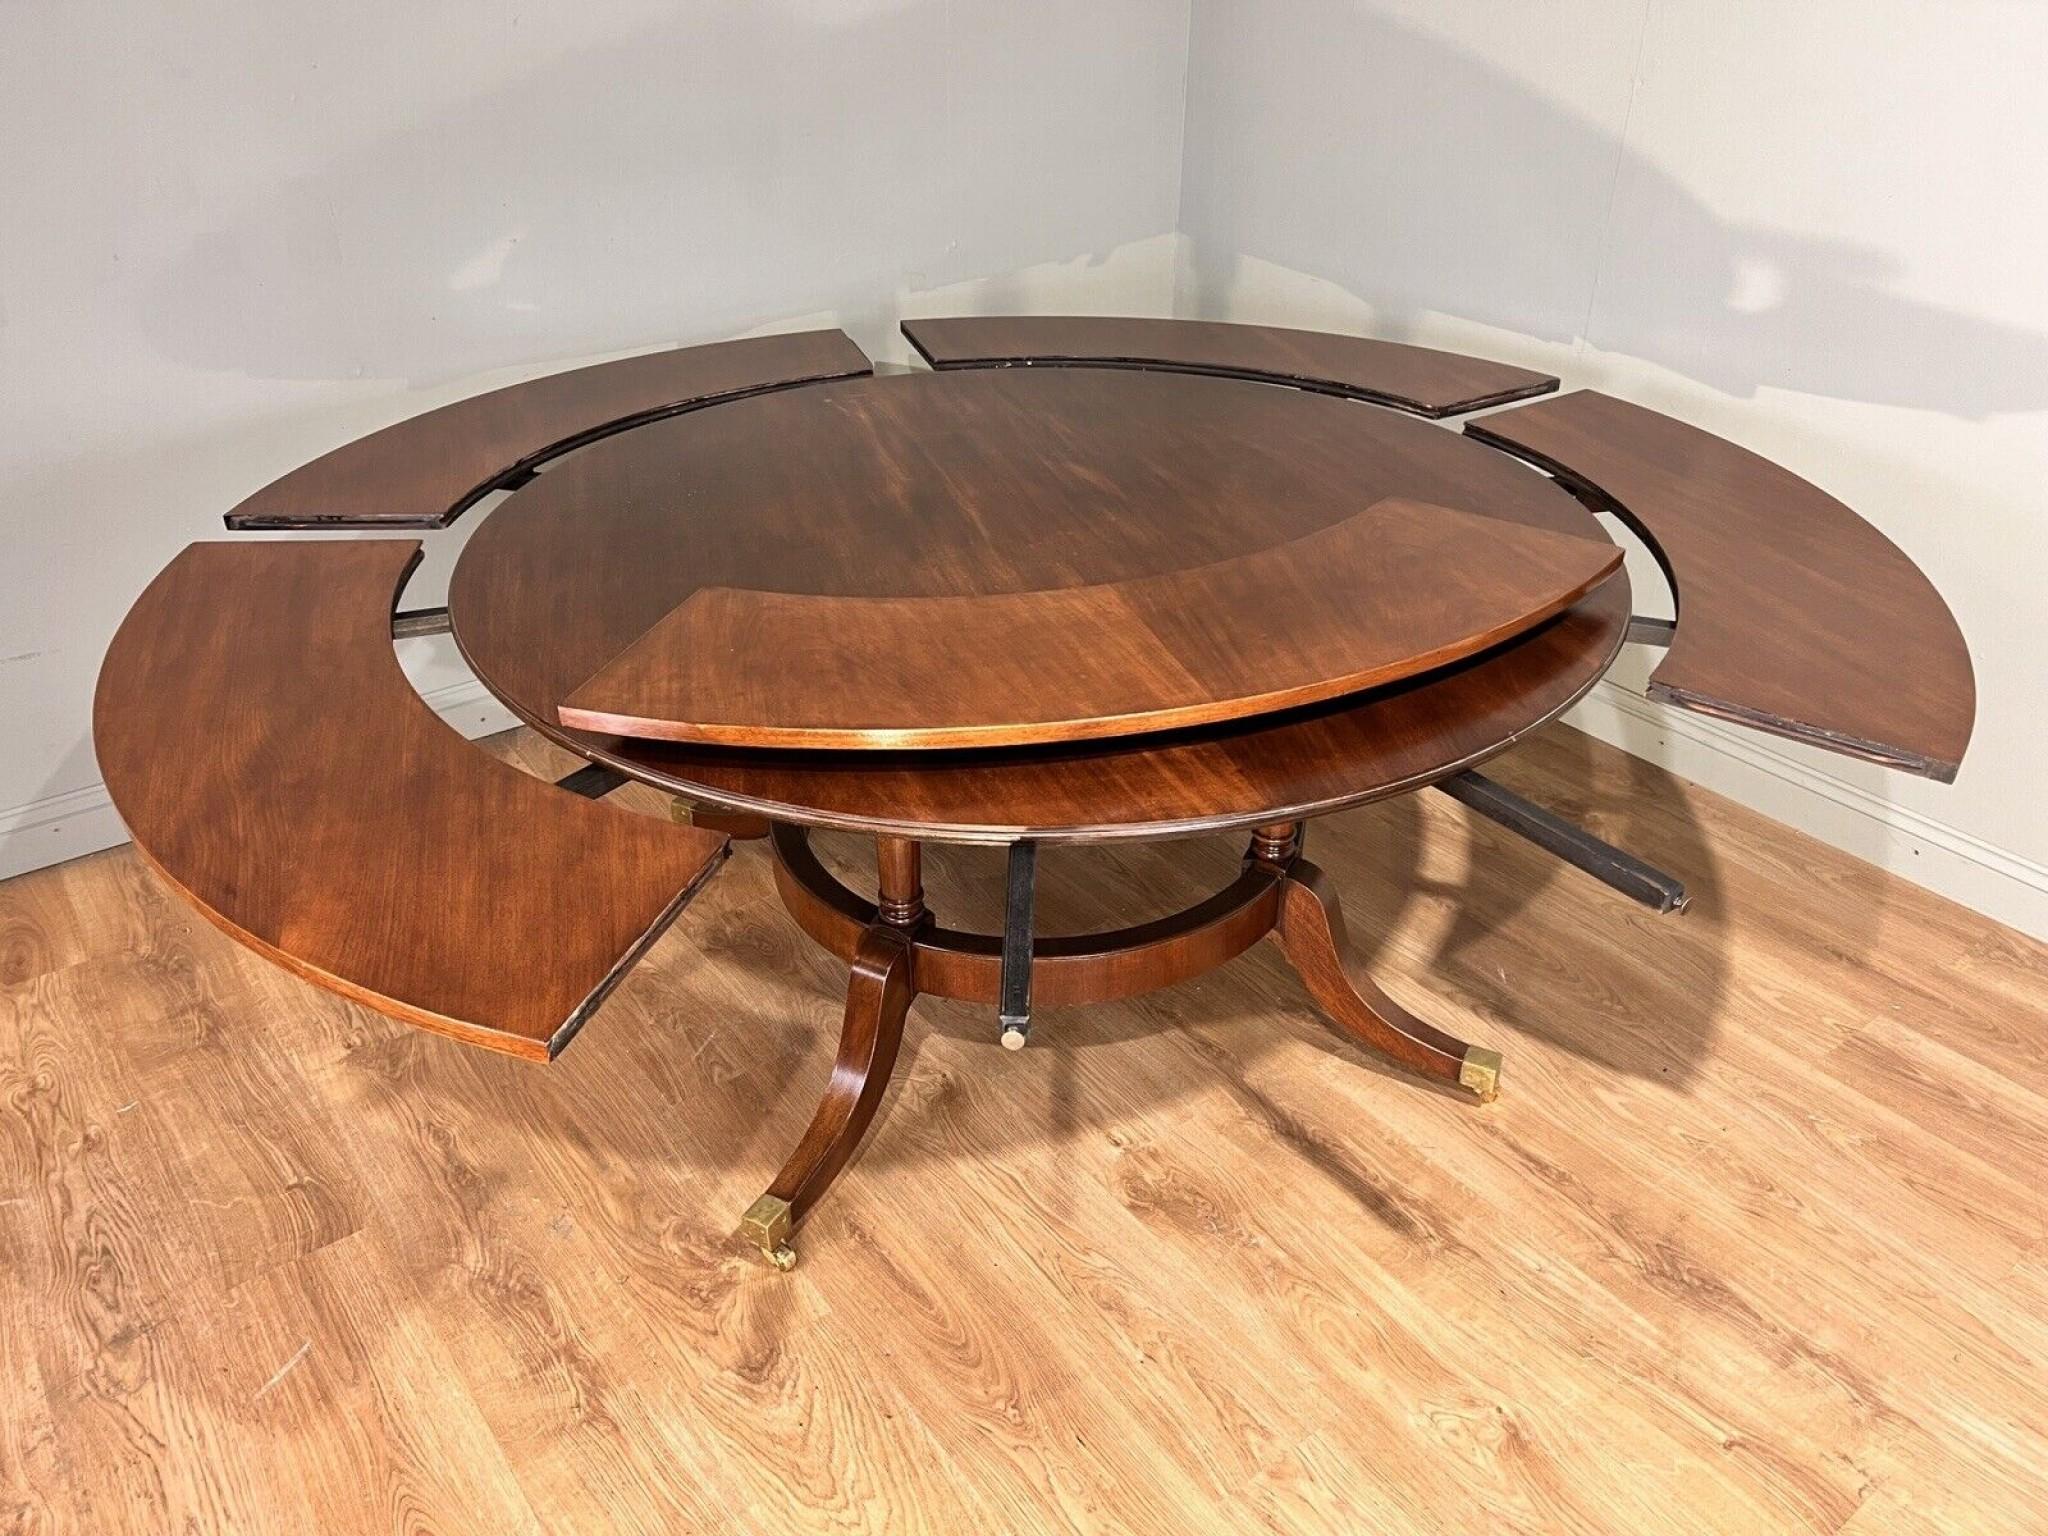 Stunning Regency style Jupe extending dining table in mahogany
Very unusual to find a table that is round and that extends
Extends via concentric leaves that fit in around the
circumference of the main table
Great for when you have dinner parties